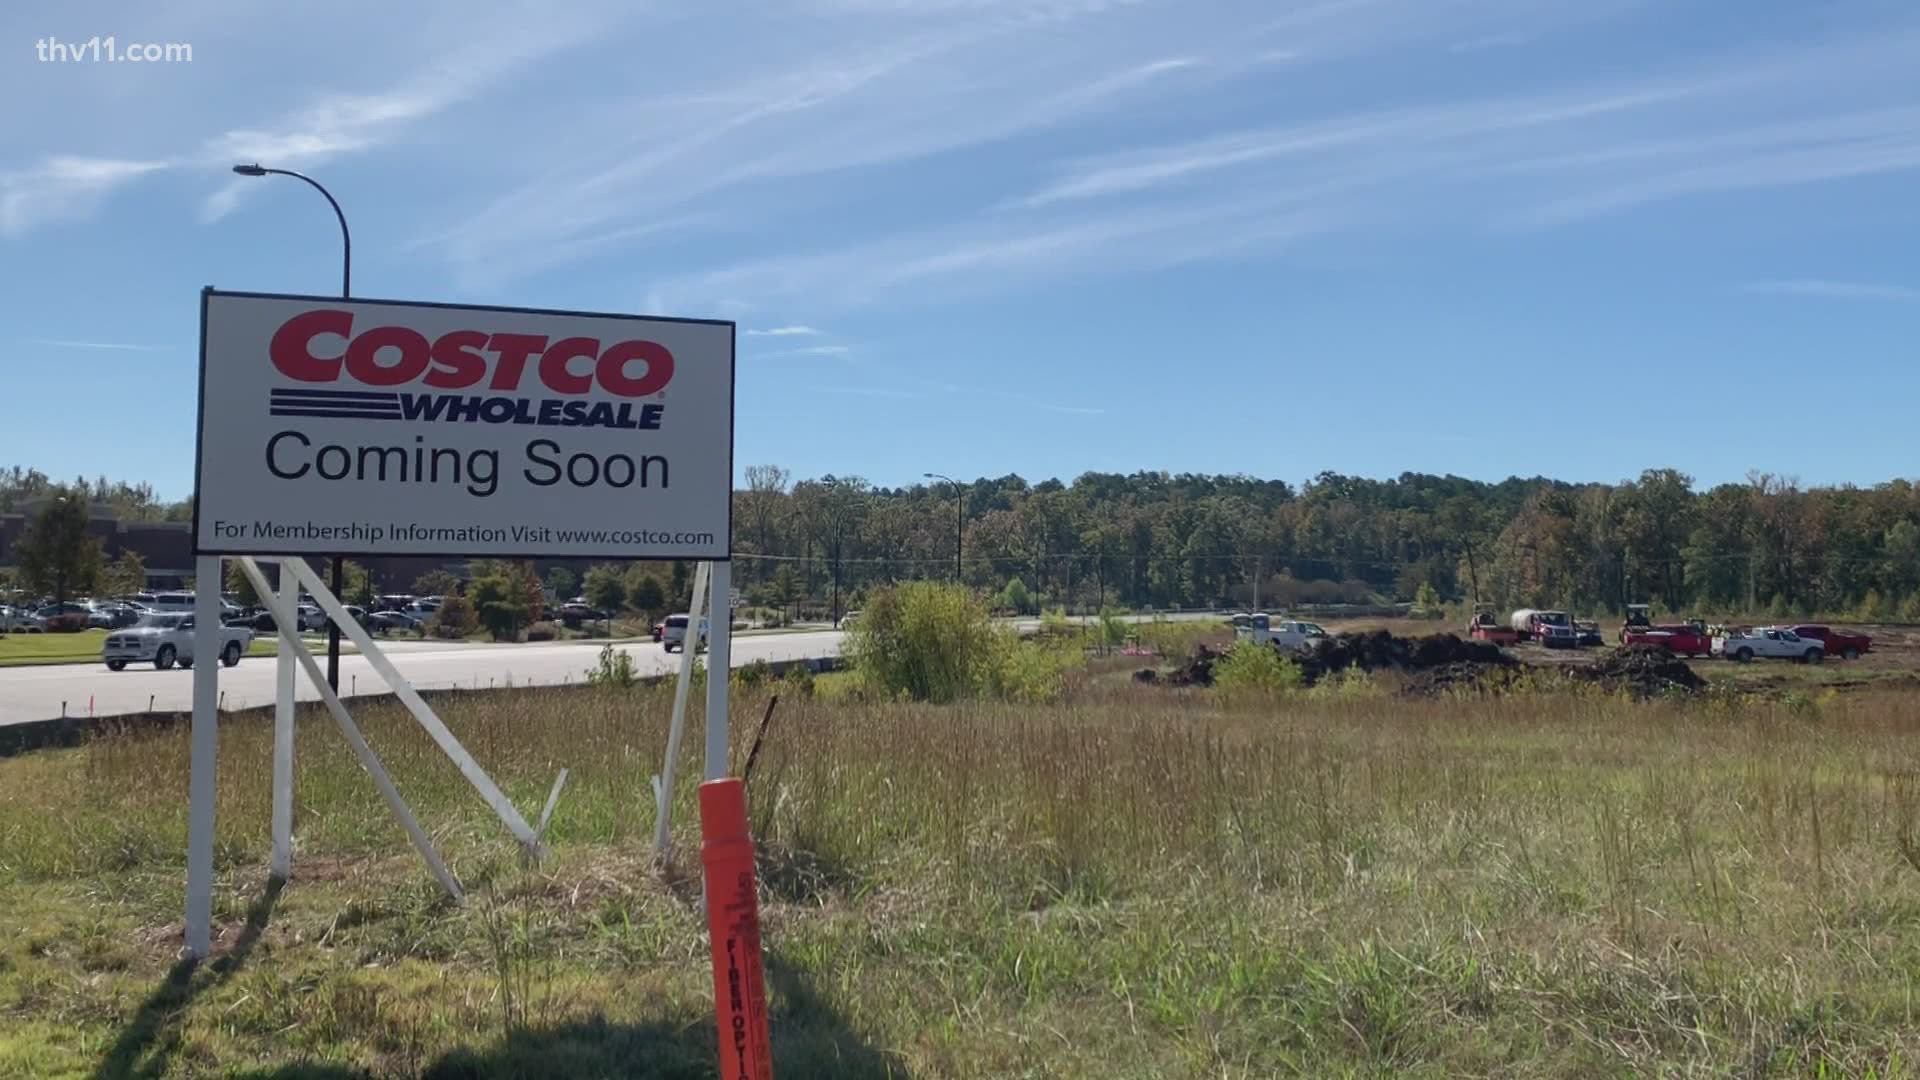 Costco Wholesale coming soon to Little Rock